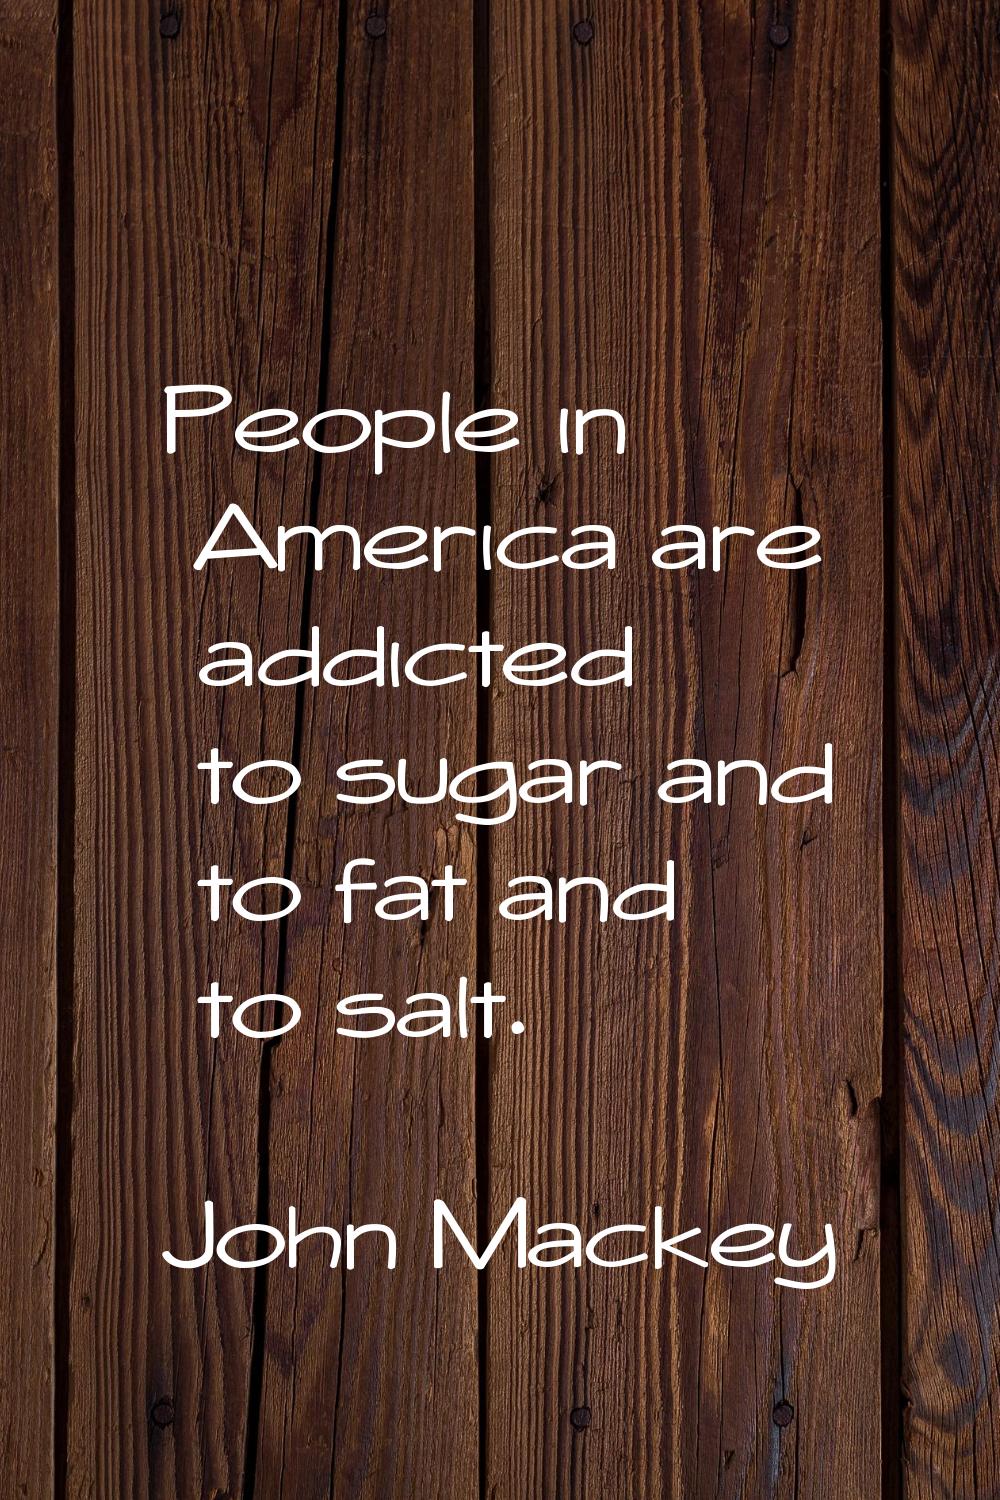 People in America are addicted to sugar and to fat and to salt.